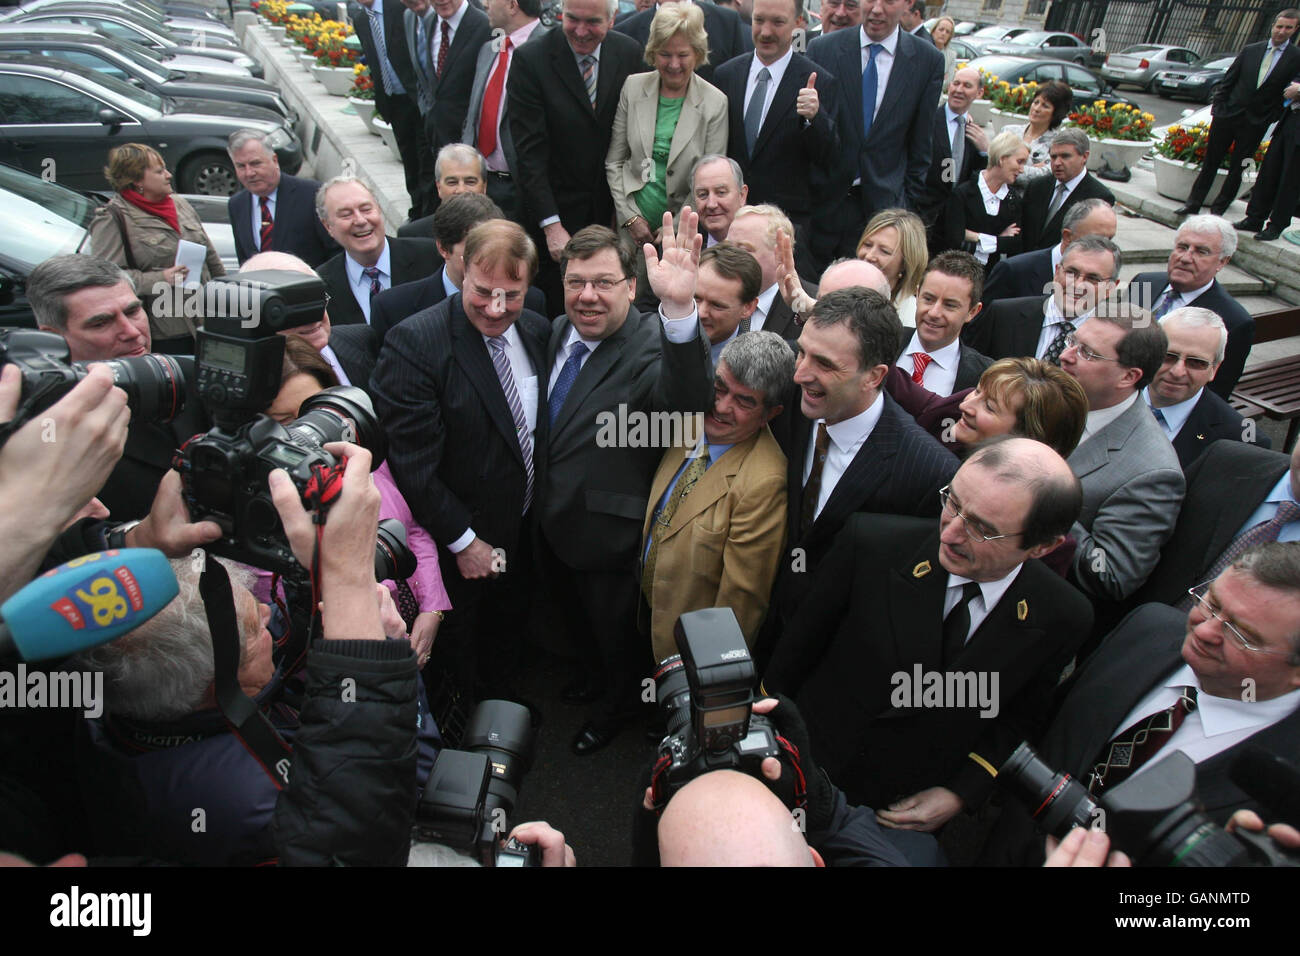 Irish Taoiseach-in-waiting Brian Cowen celebrates after he was publicly unveiled as Fianna Fail party leader-designate today outside the Dail parliament in Dublin. Stock Photo